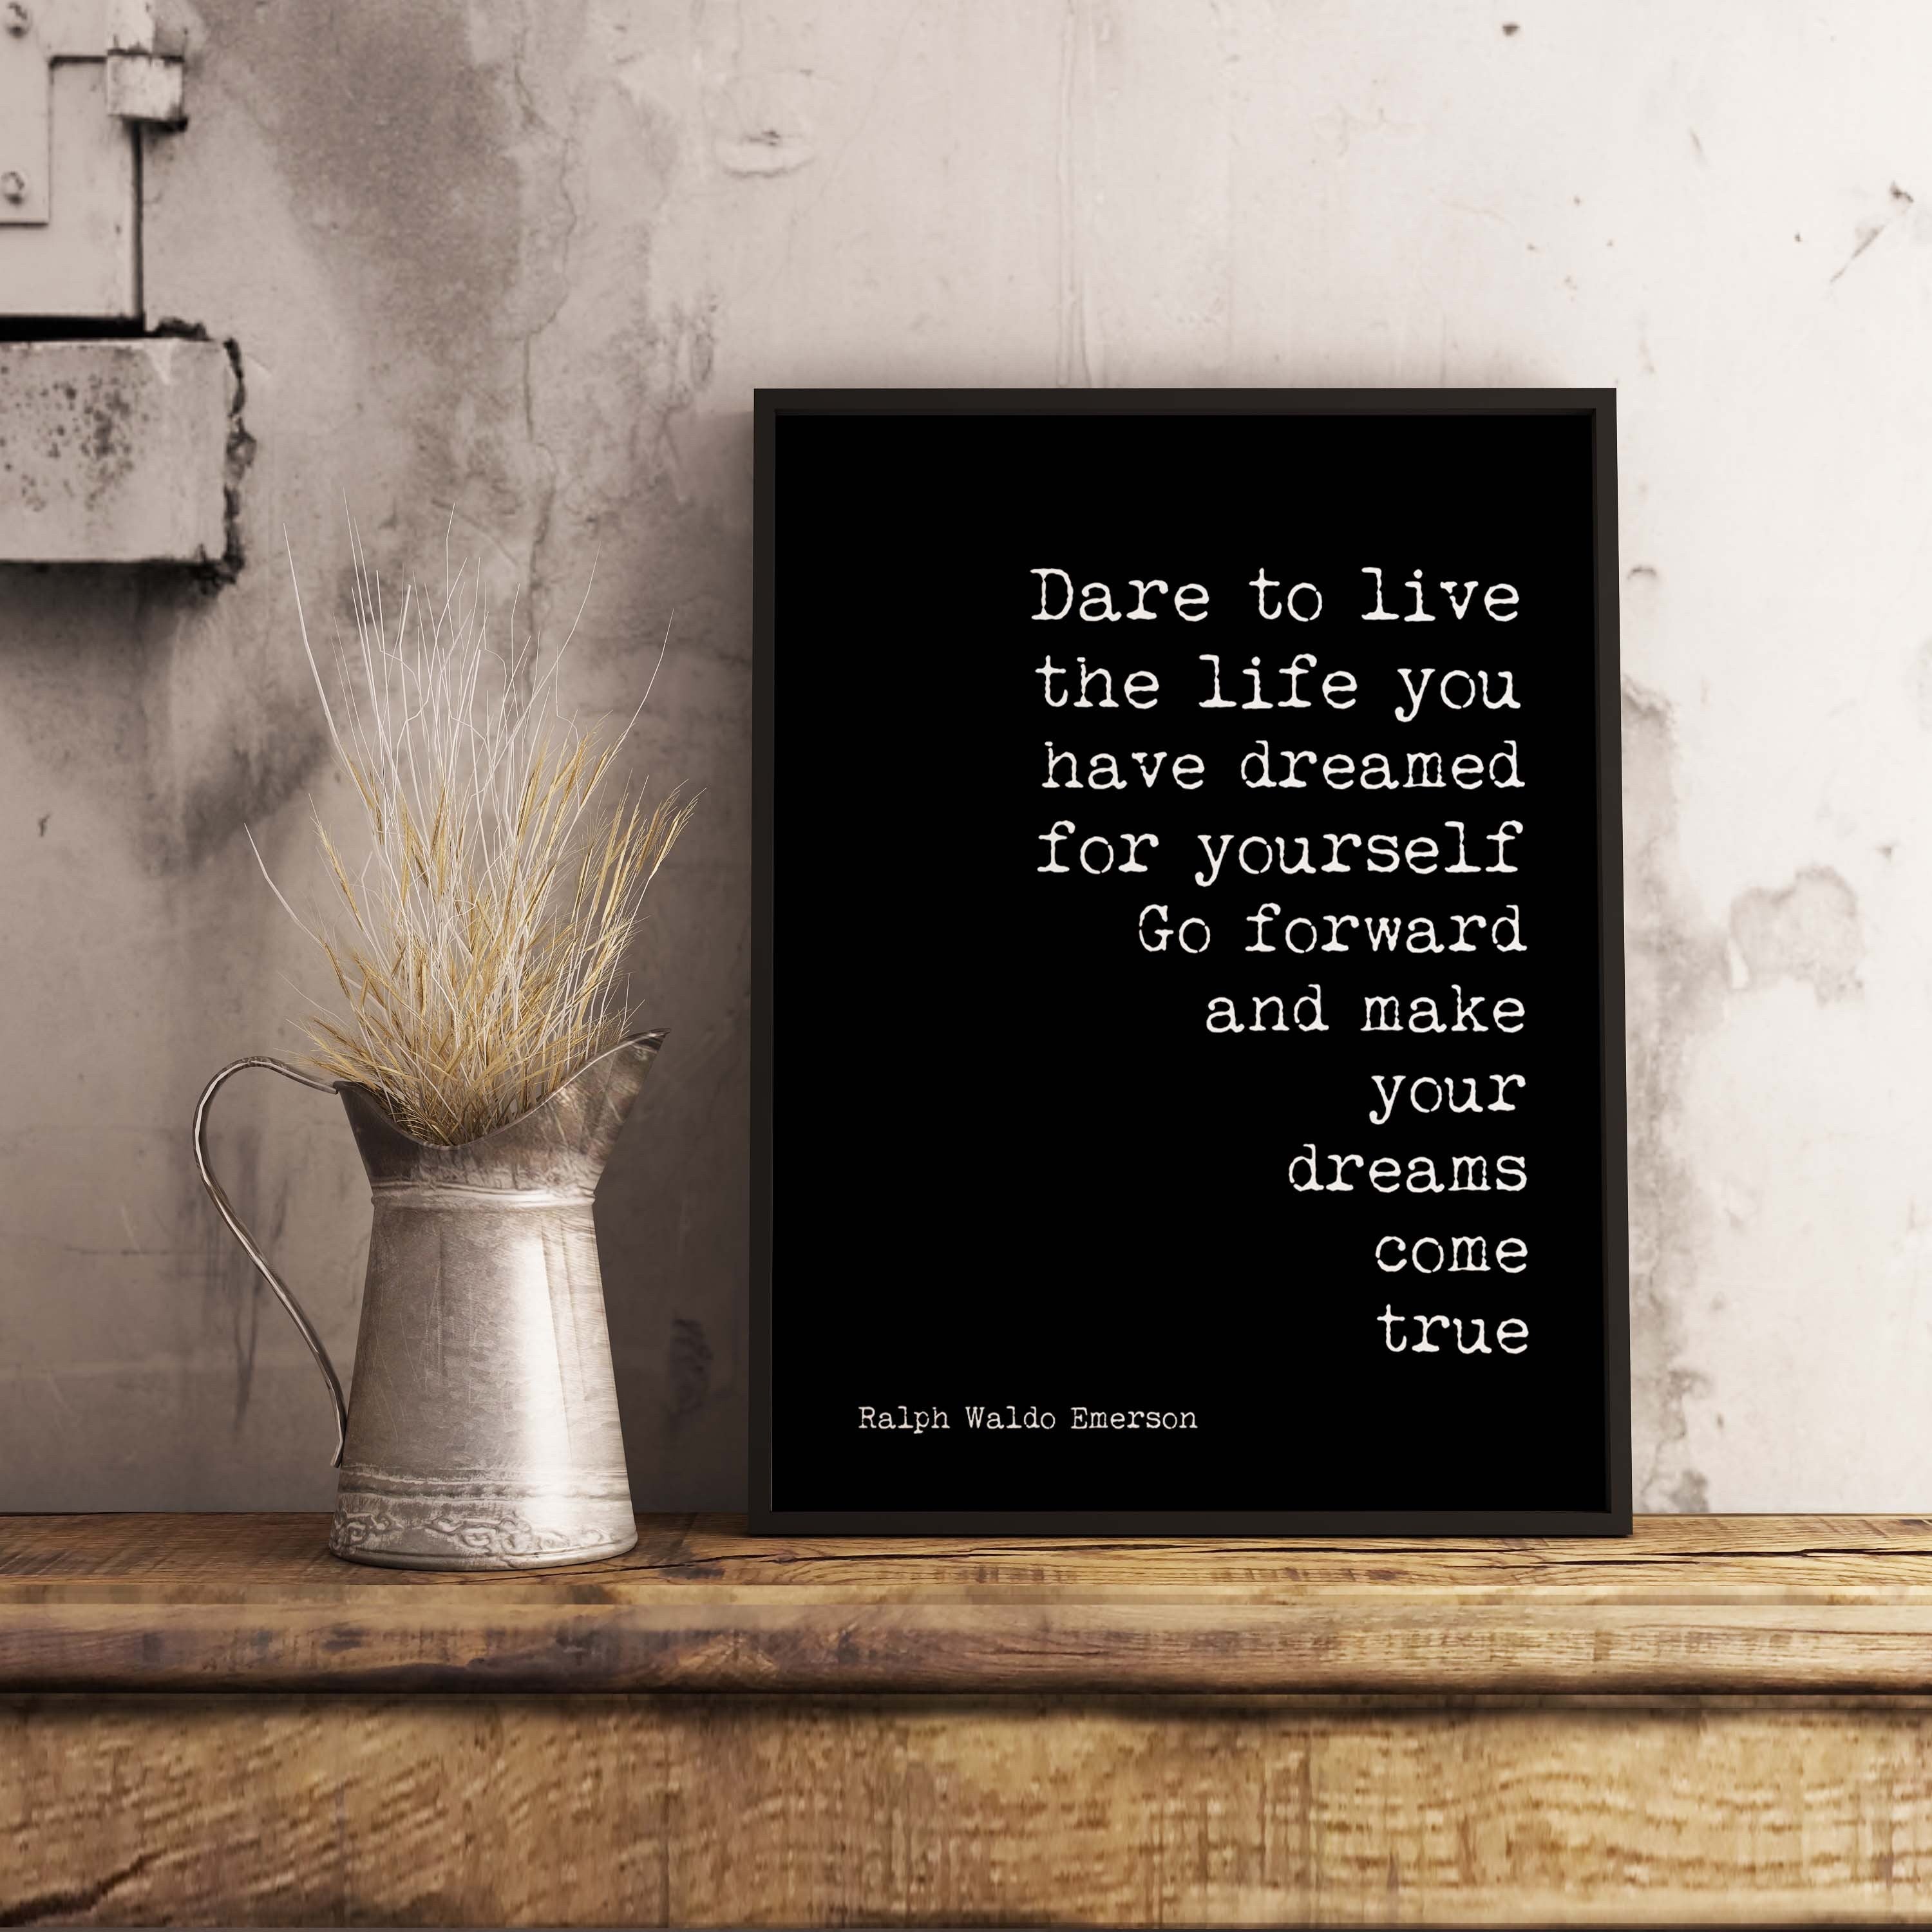 Framed Ralph Waldo Emerson Quote Print, Dare to Live the Life You Have Dreamed Inspirational Art in Black & White for Home Wall Decor